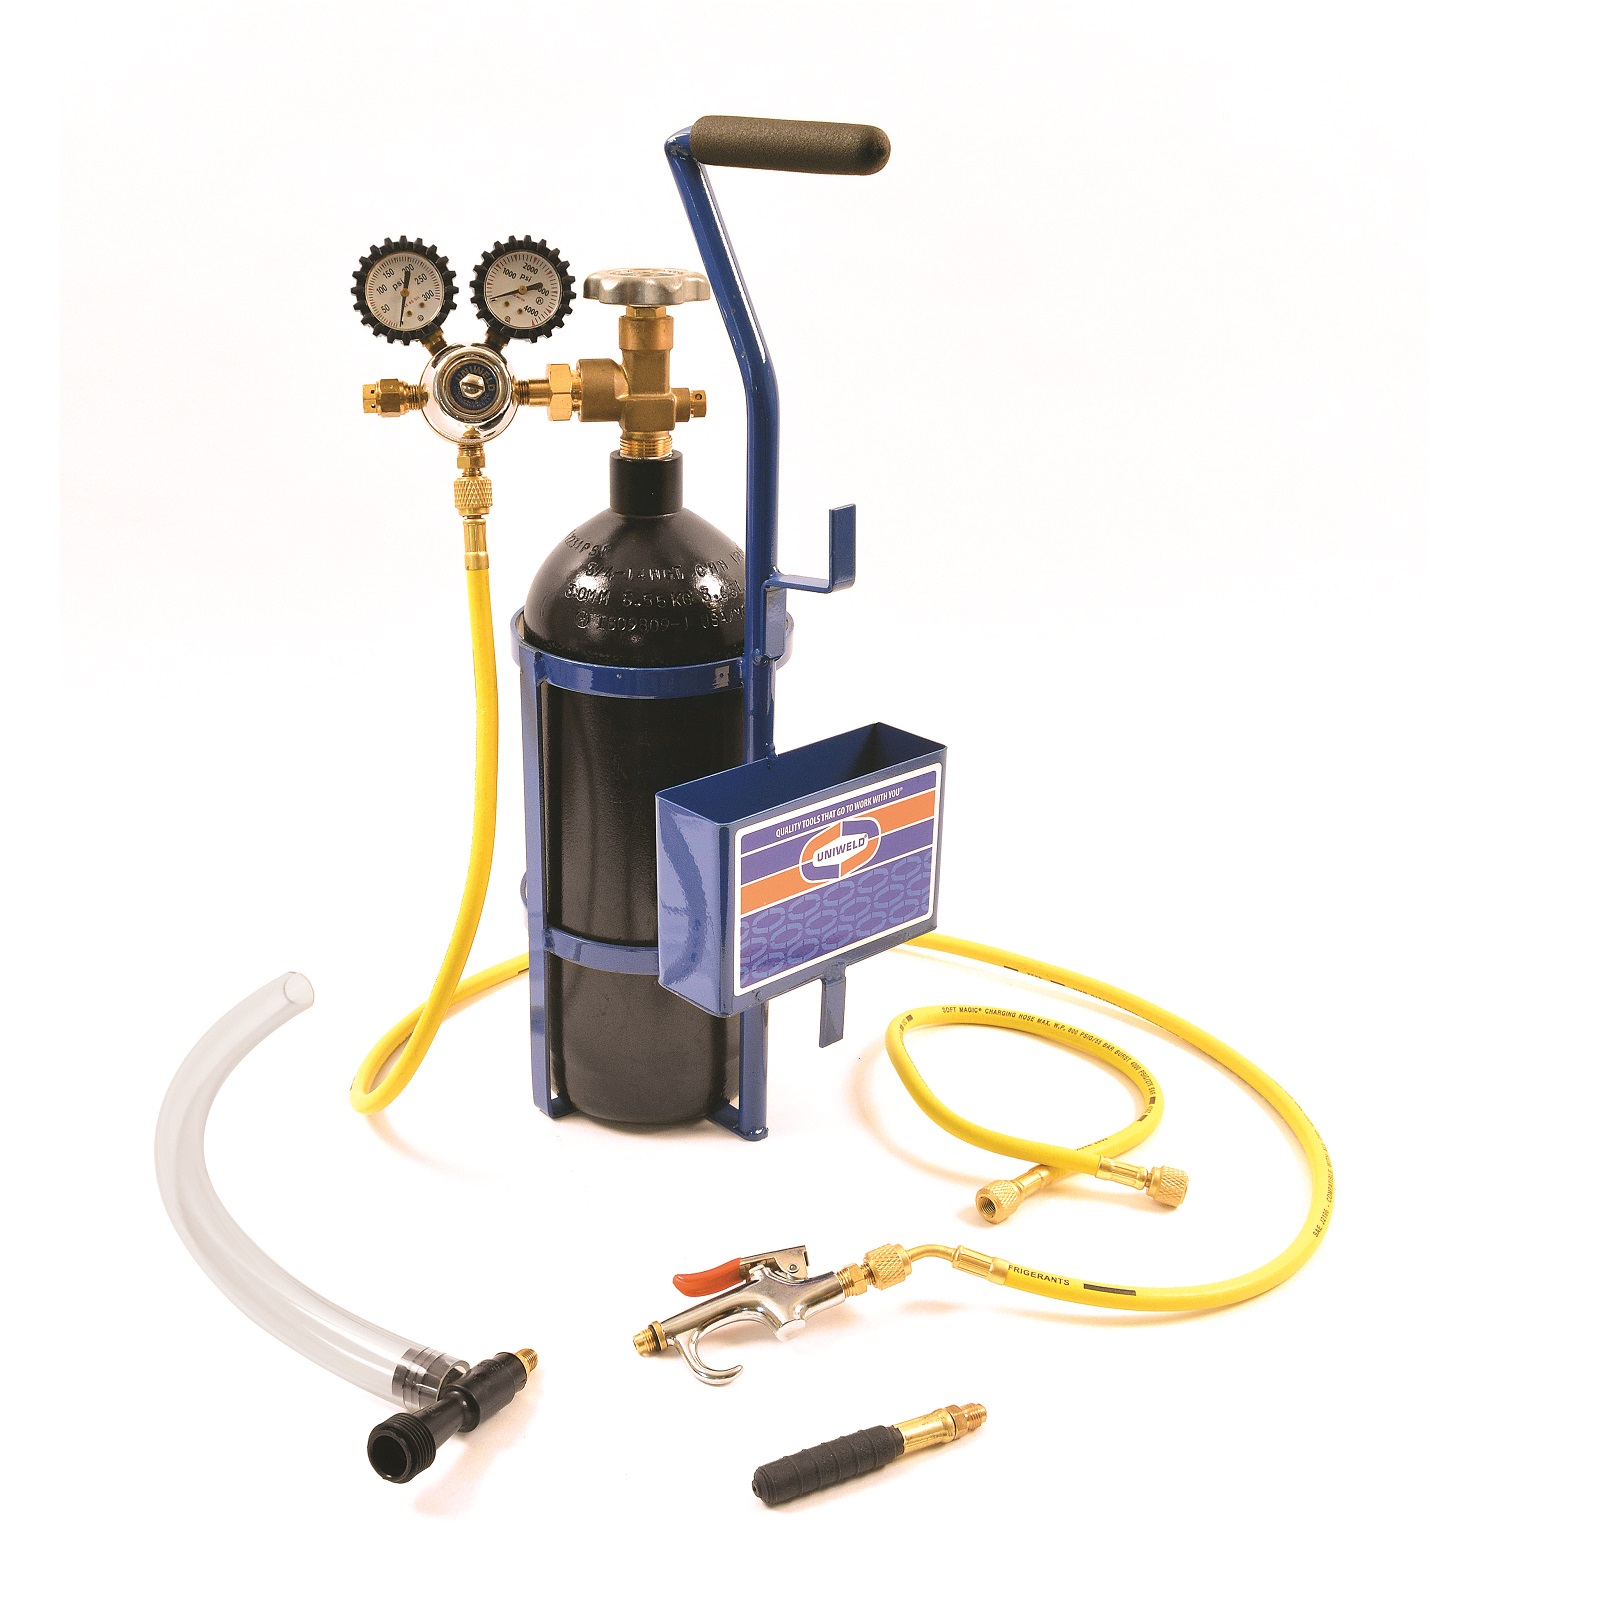 Uniweld 40040 Nitrogen Sludge Sucker and Blaster Kit with Metal Carrying Stand 